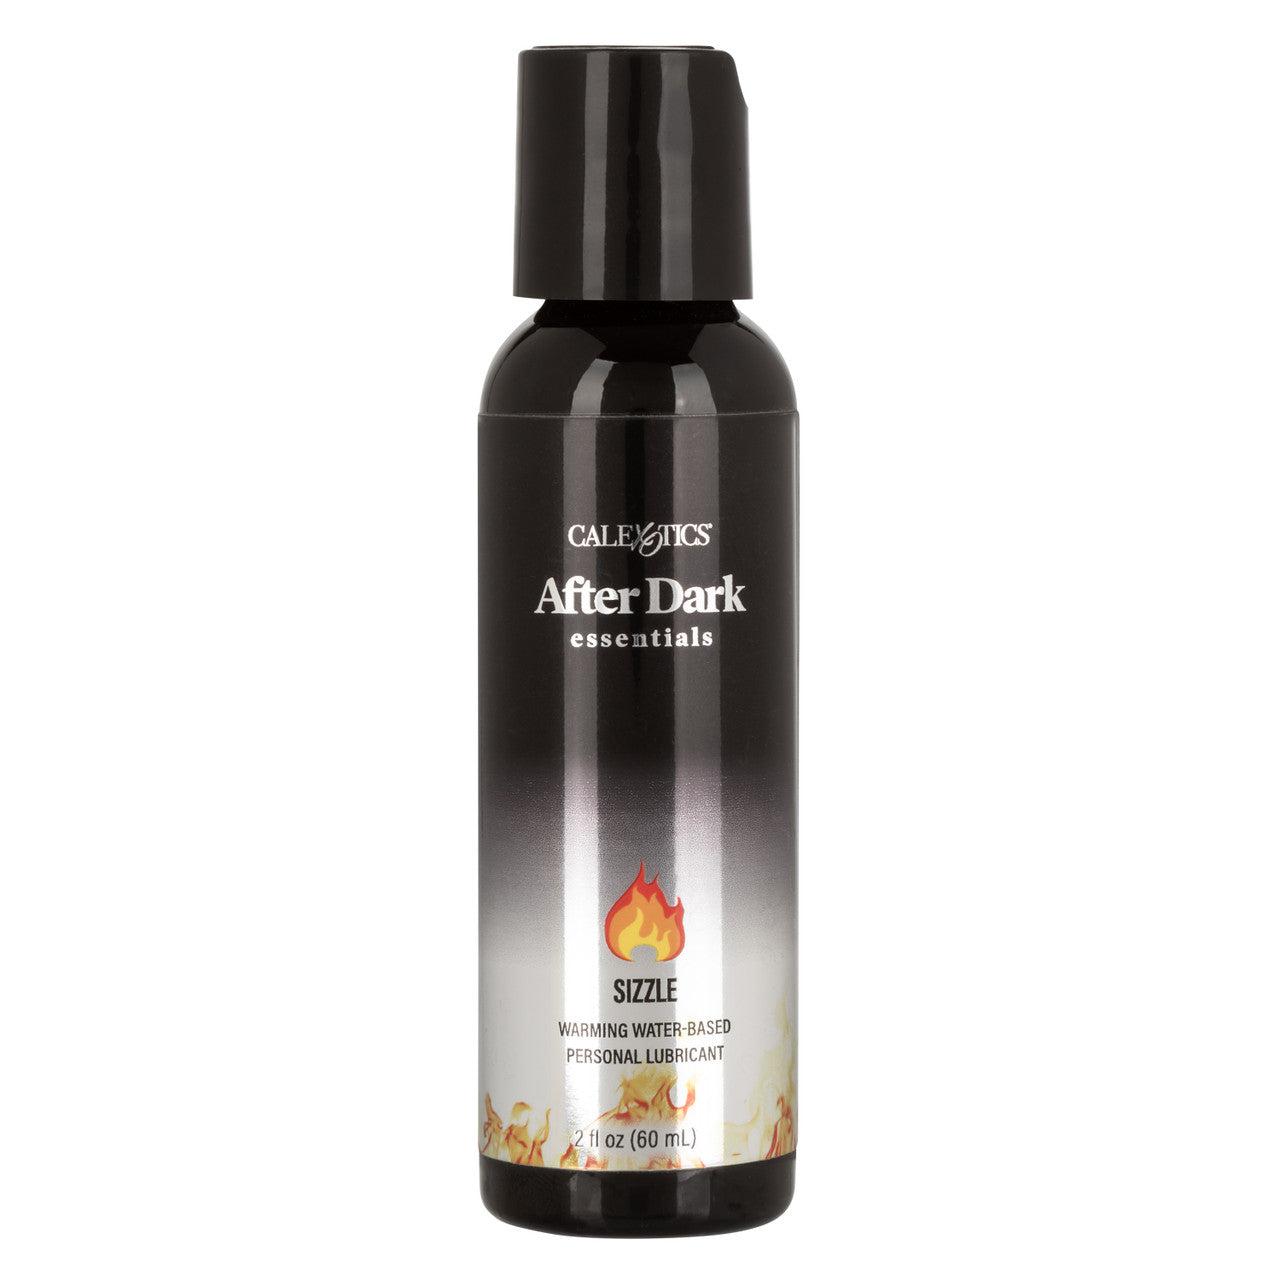 After Dark Essentials Sizzle Ultra Warming  Water-Based Personal Lubricant - 2 Oz.